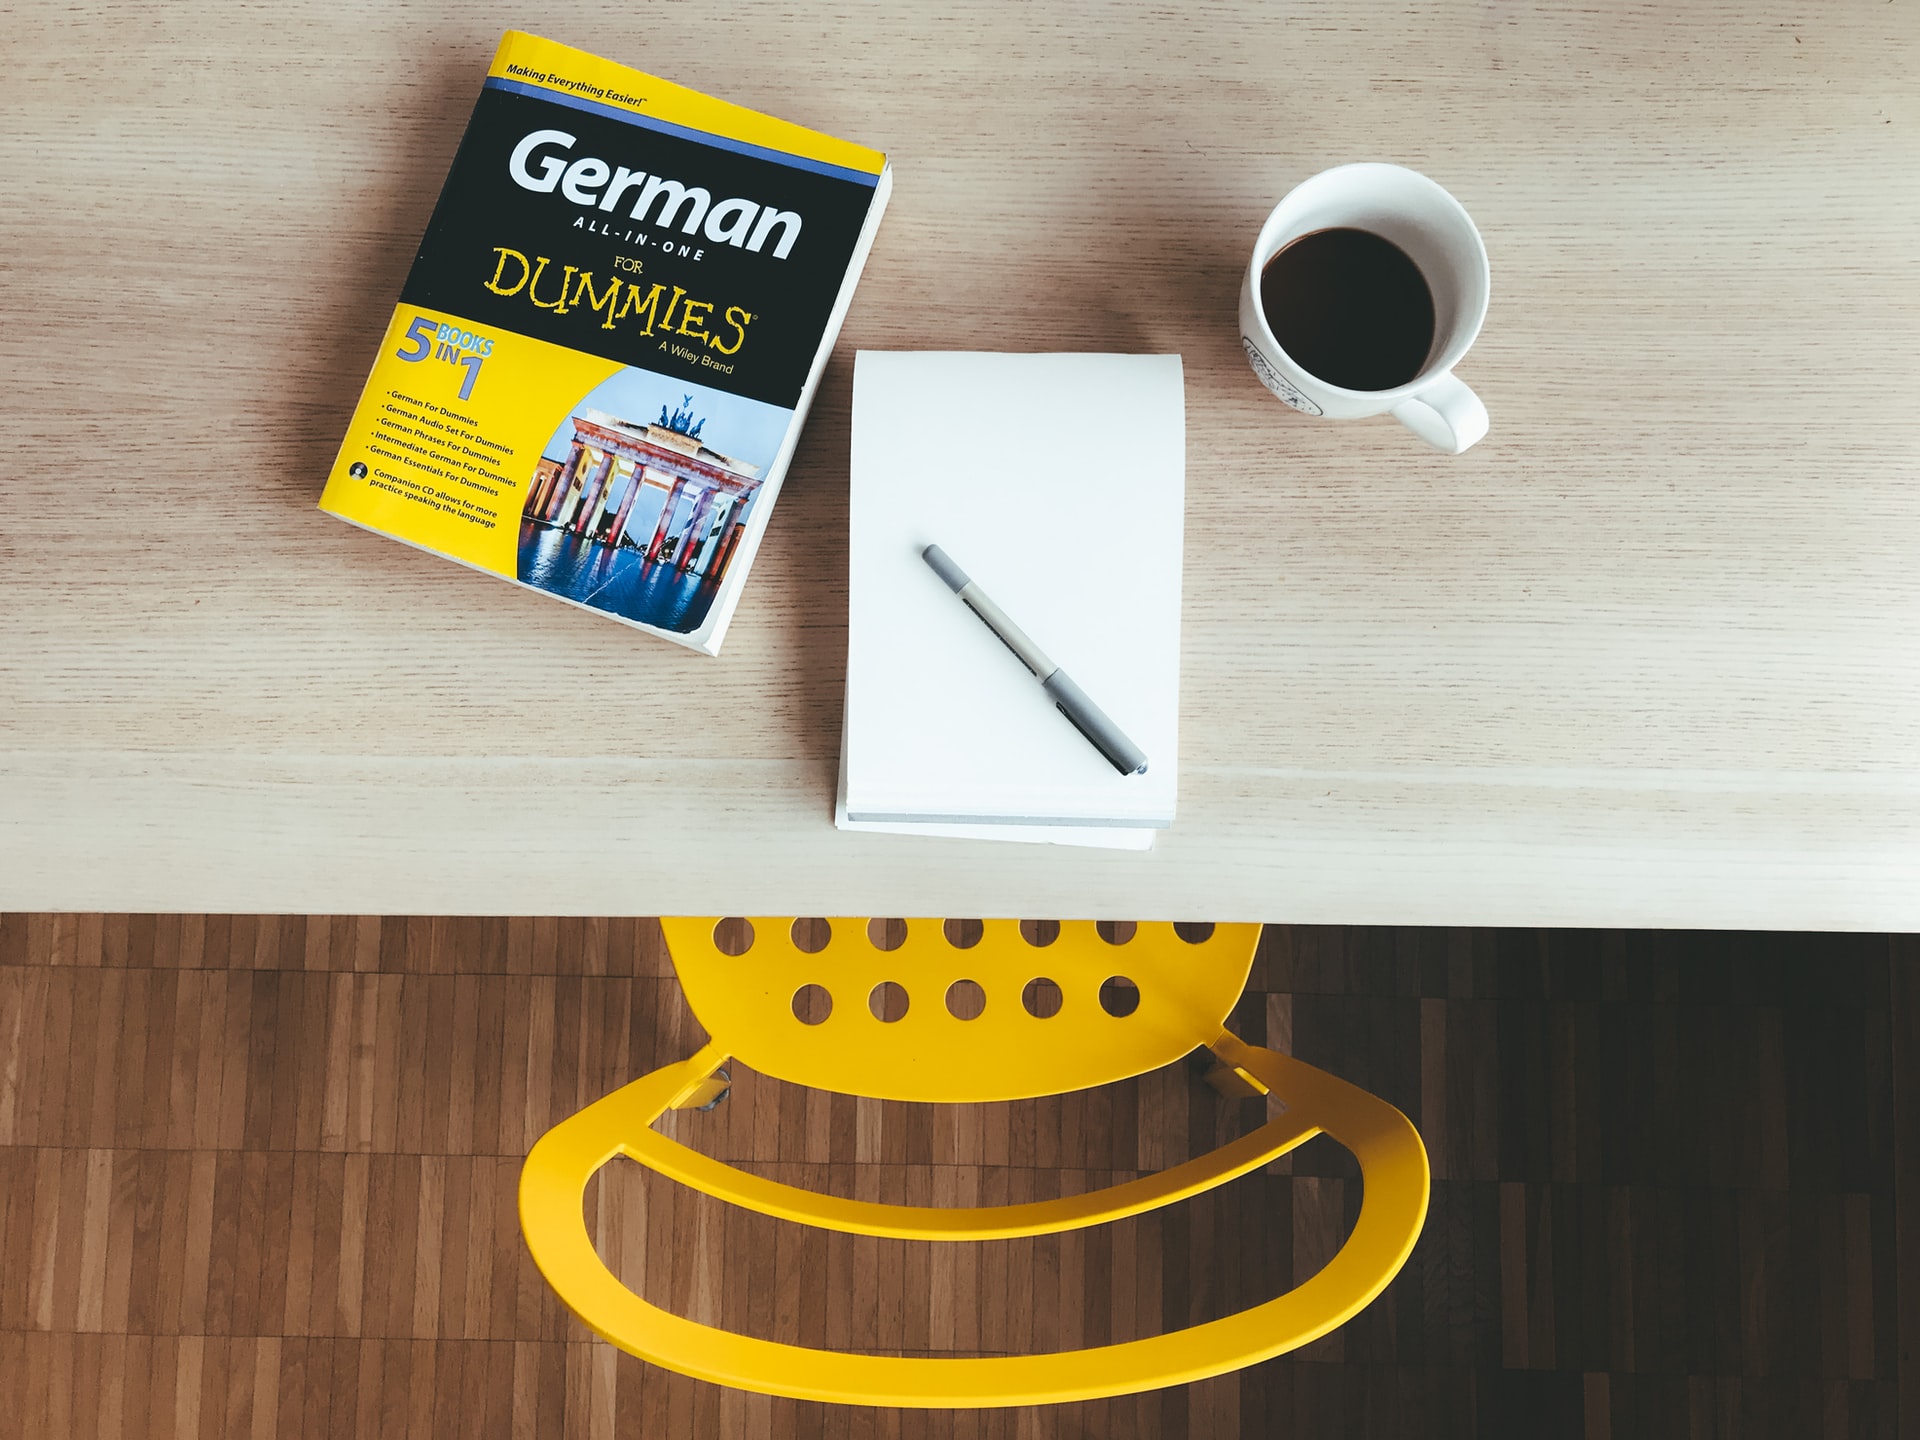 book for learning german on the desk